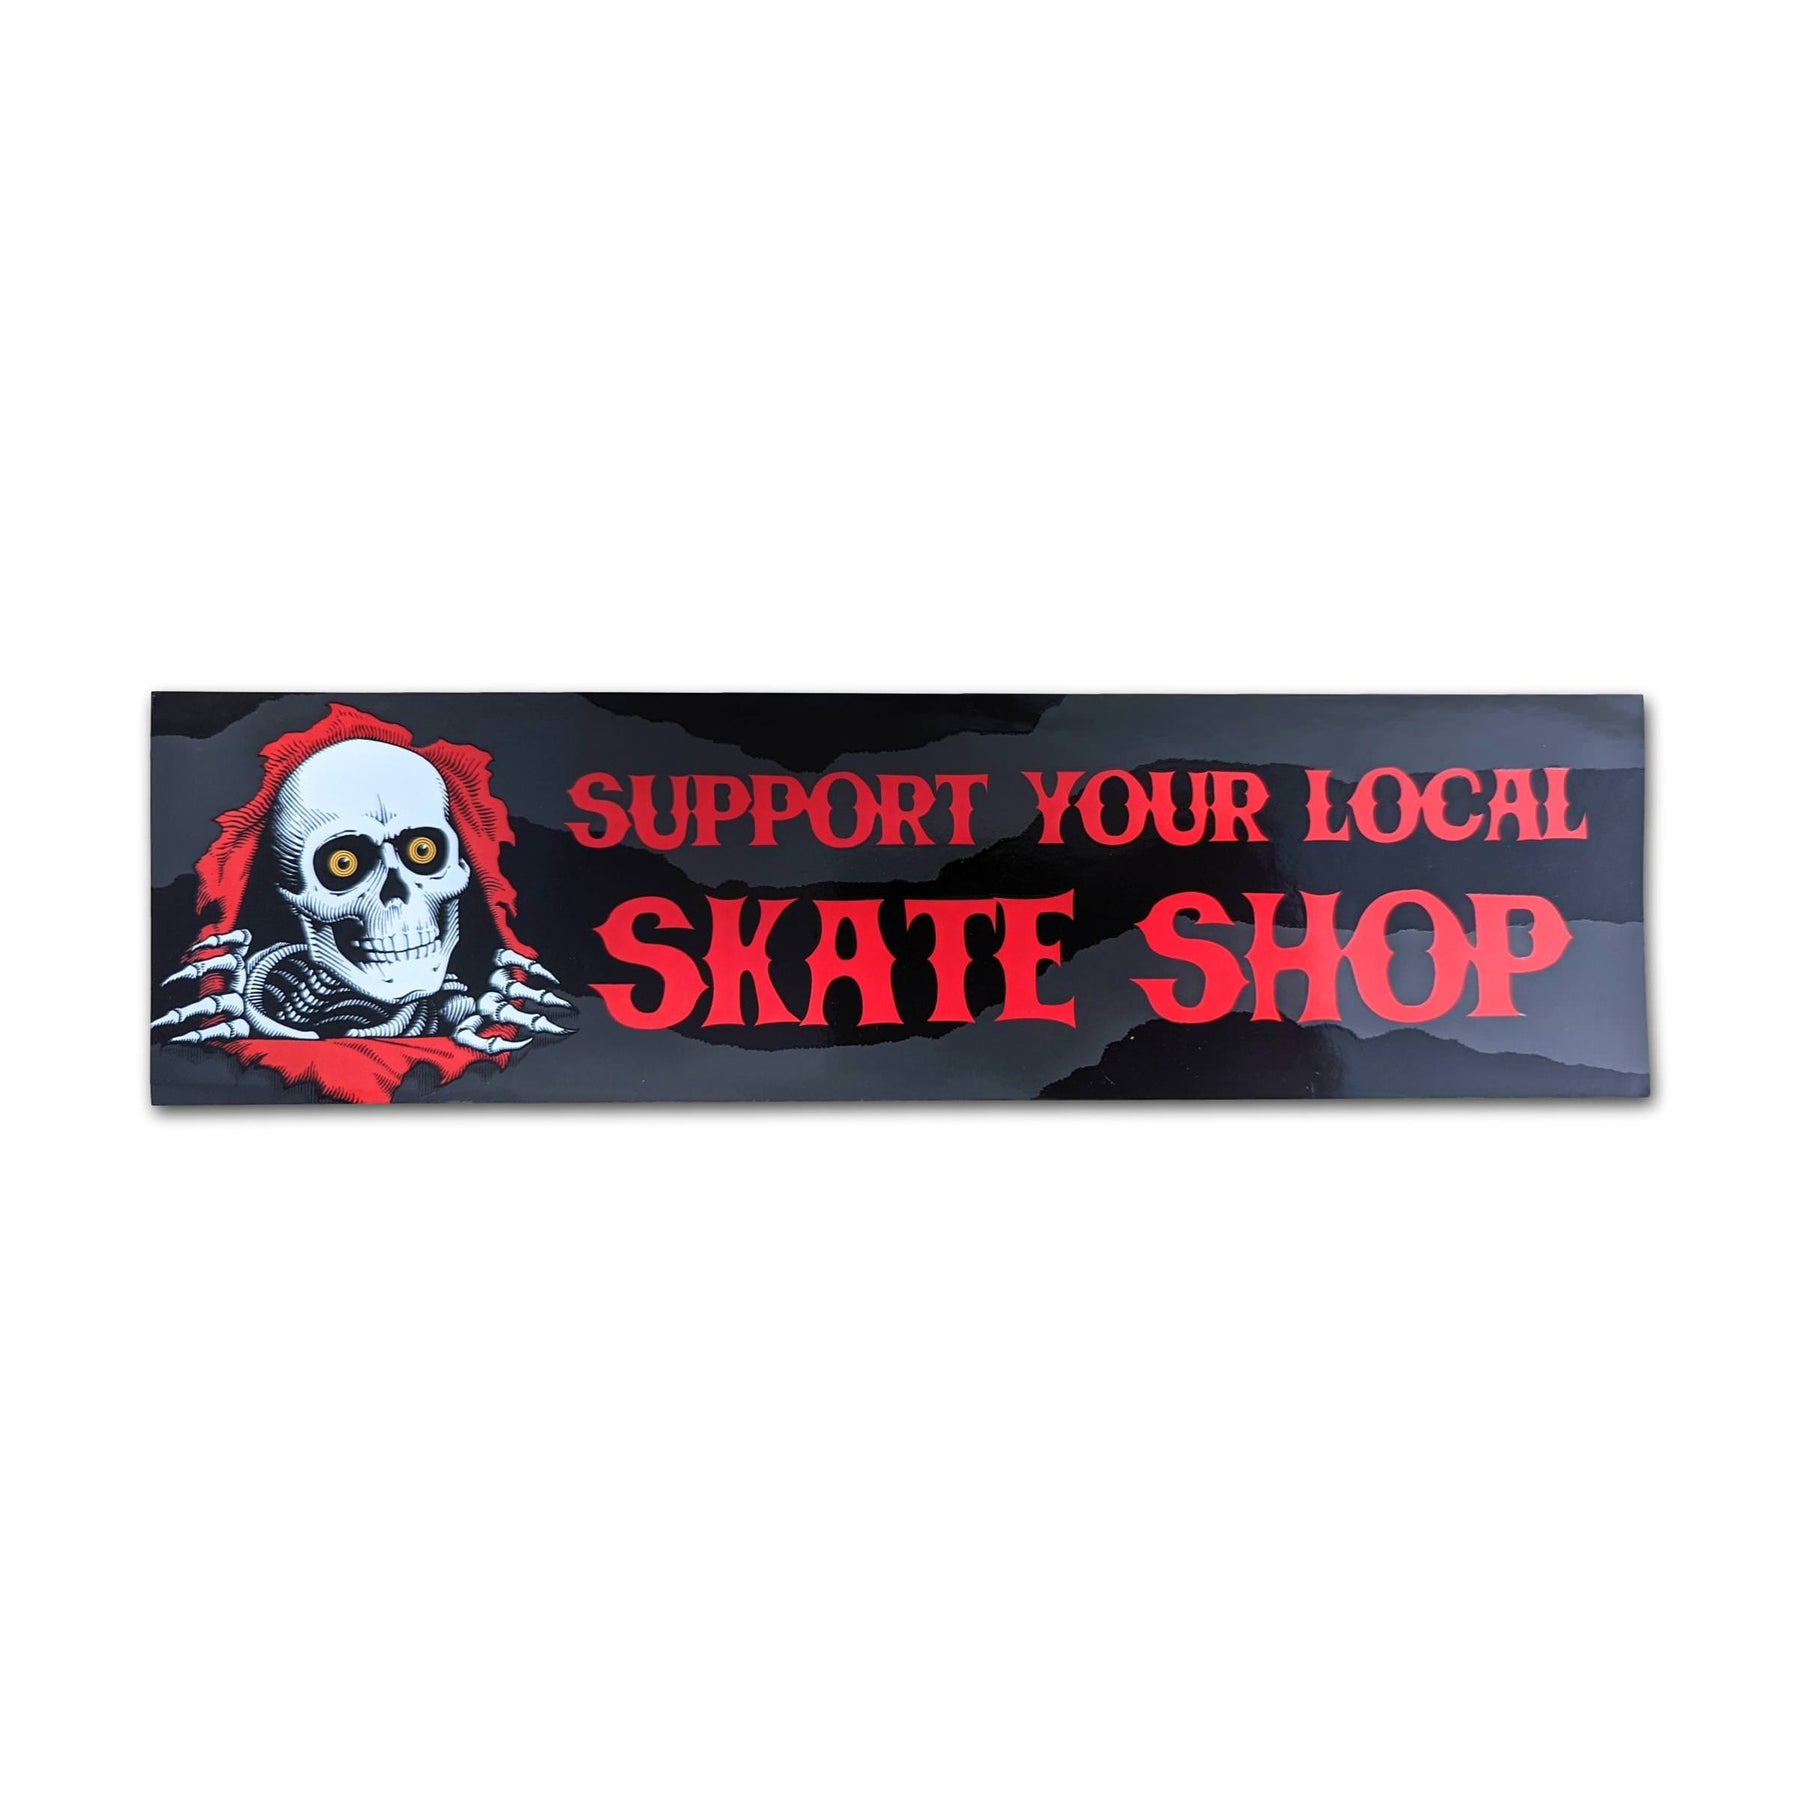 Powell-Peralta "Support Your Local Skate Shop" Bumper Sticker